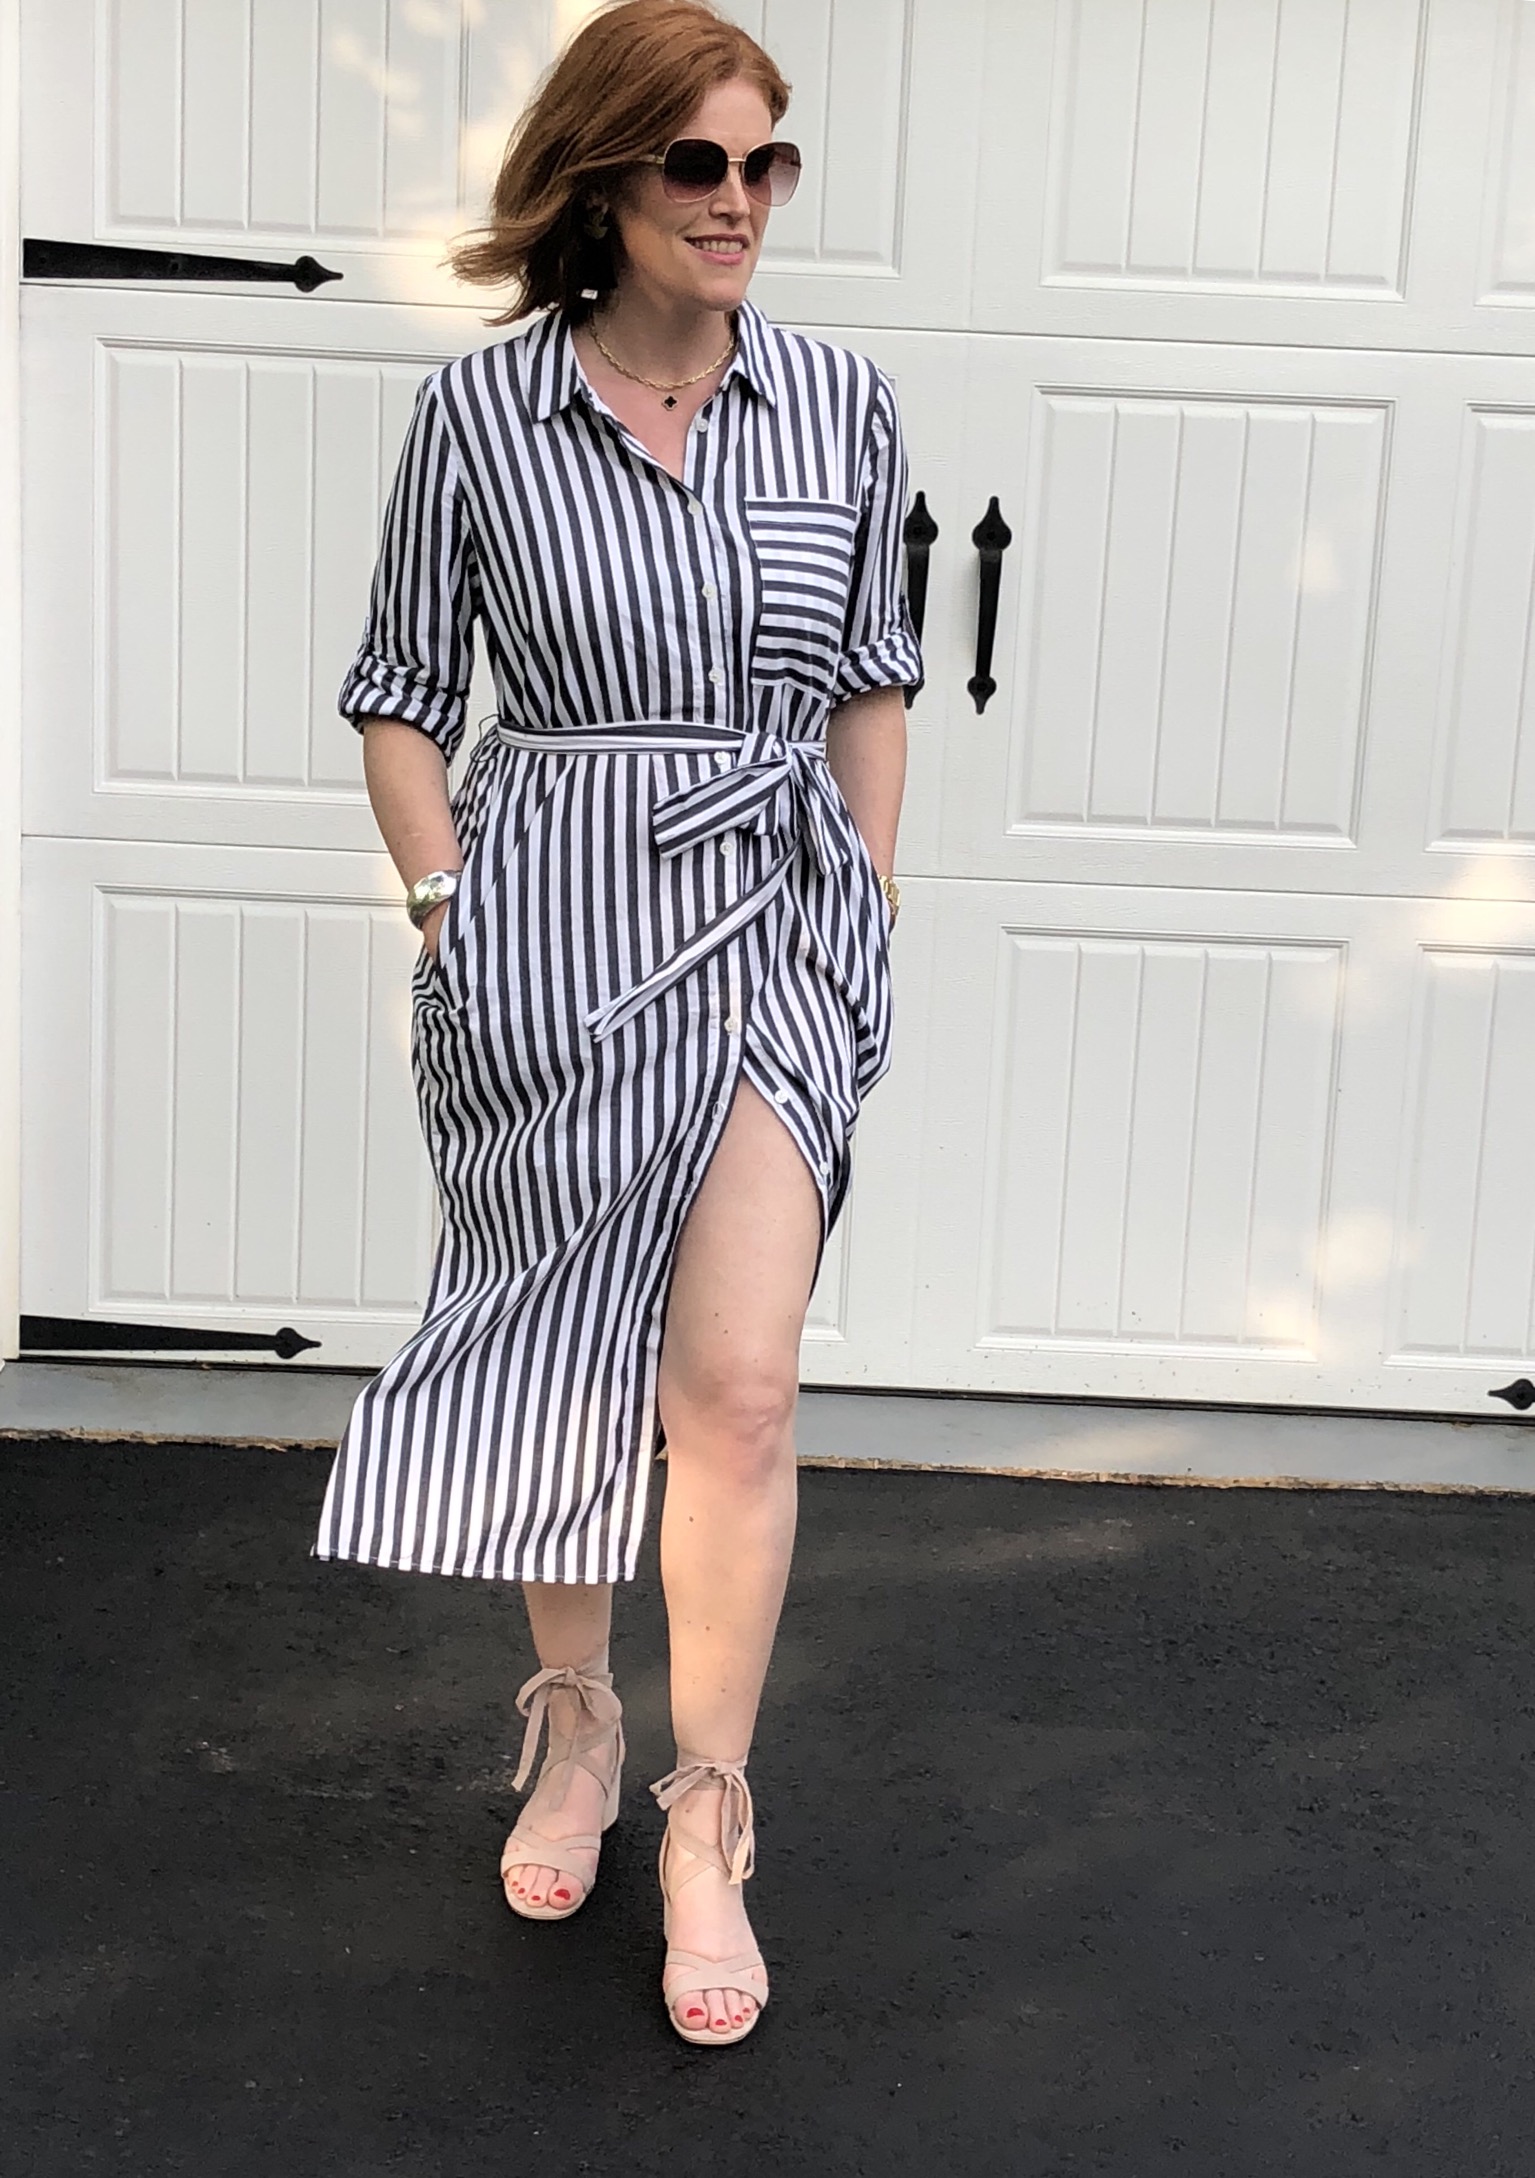 French Chic Summer Essential: The Shirt Dress